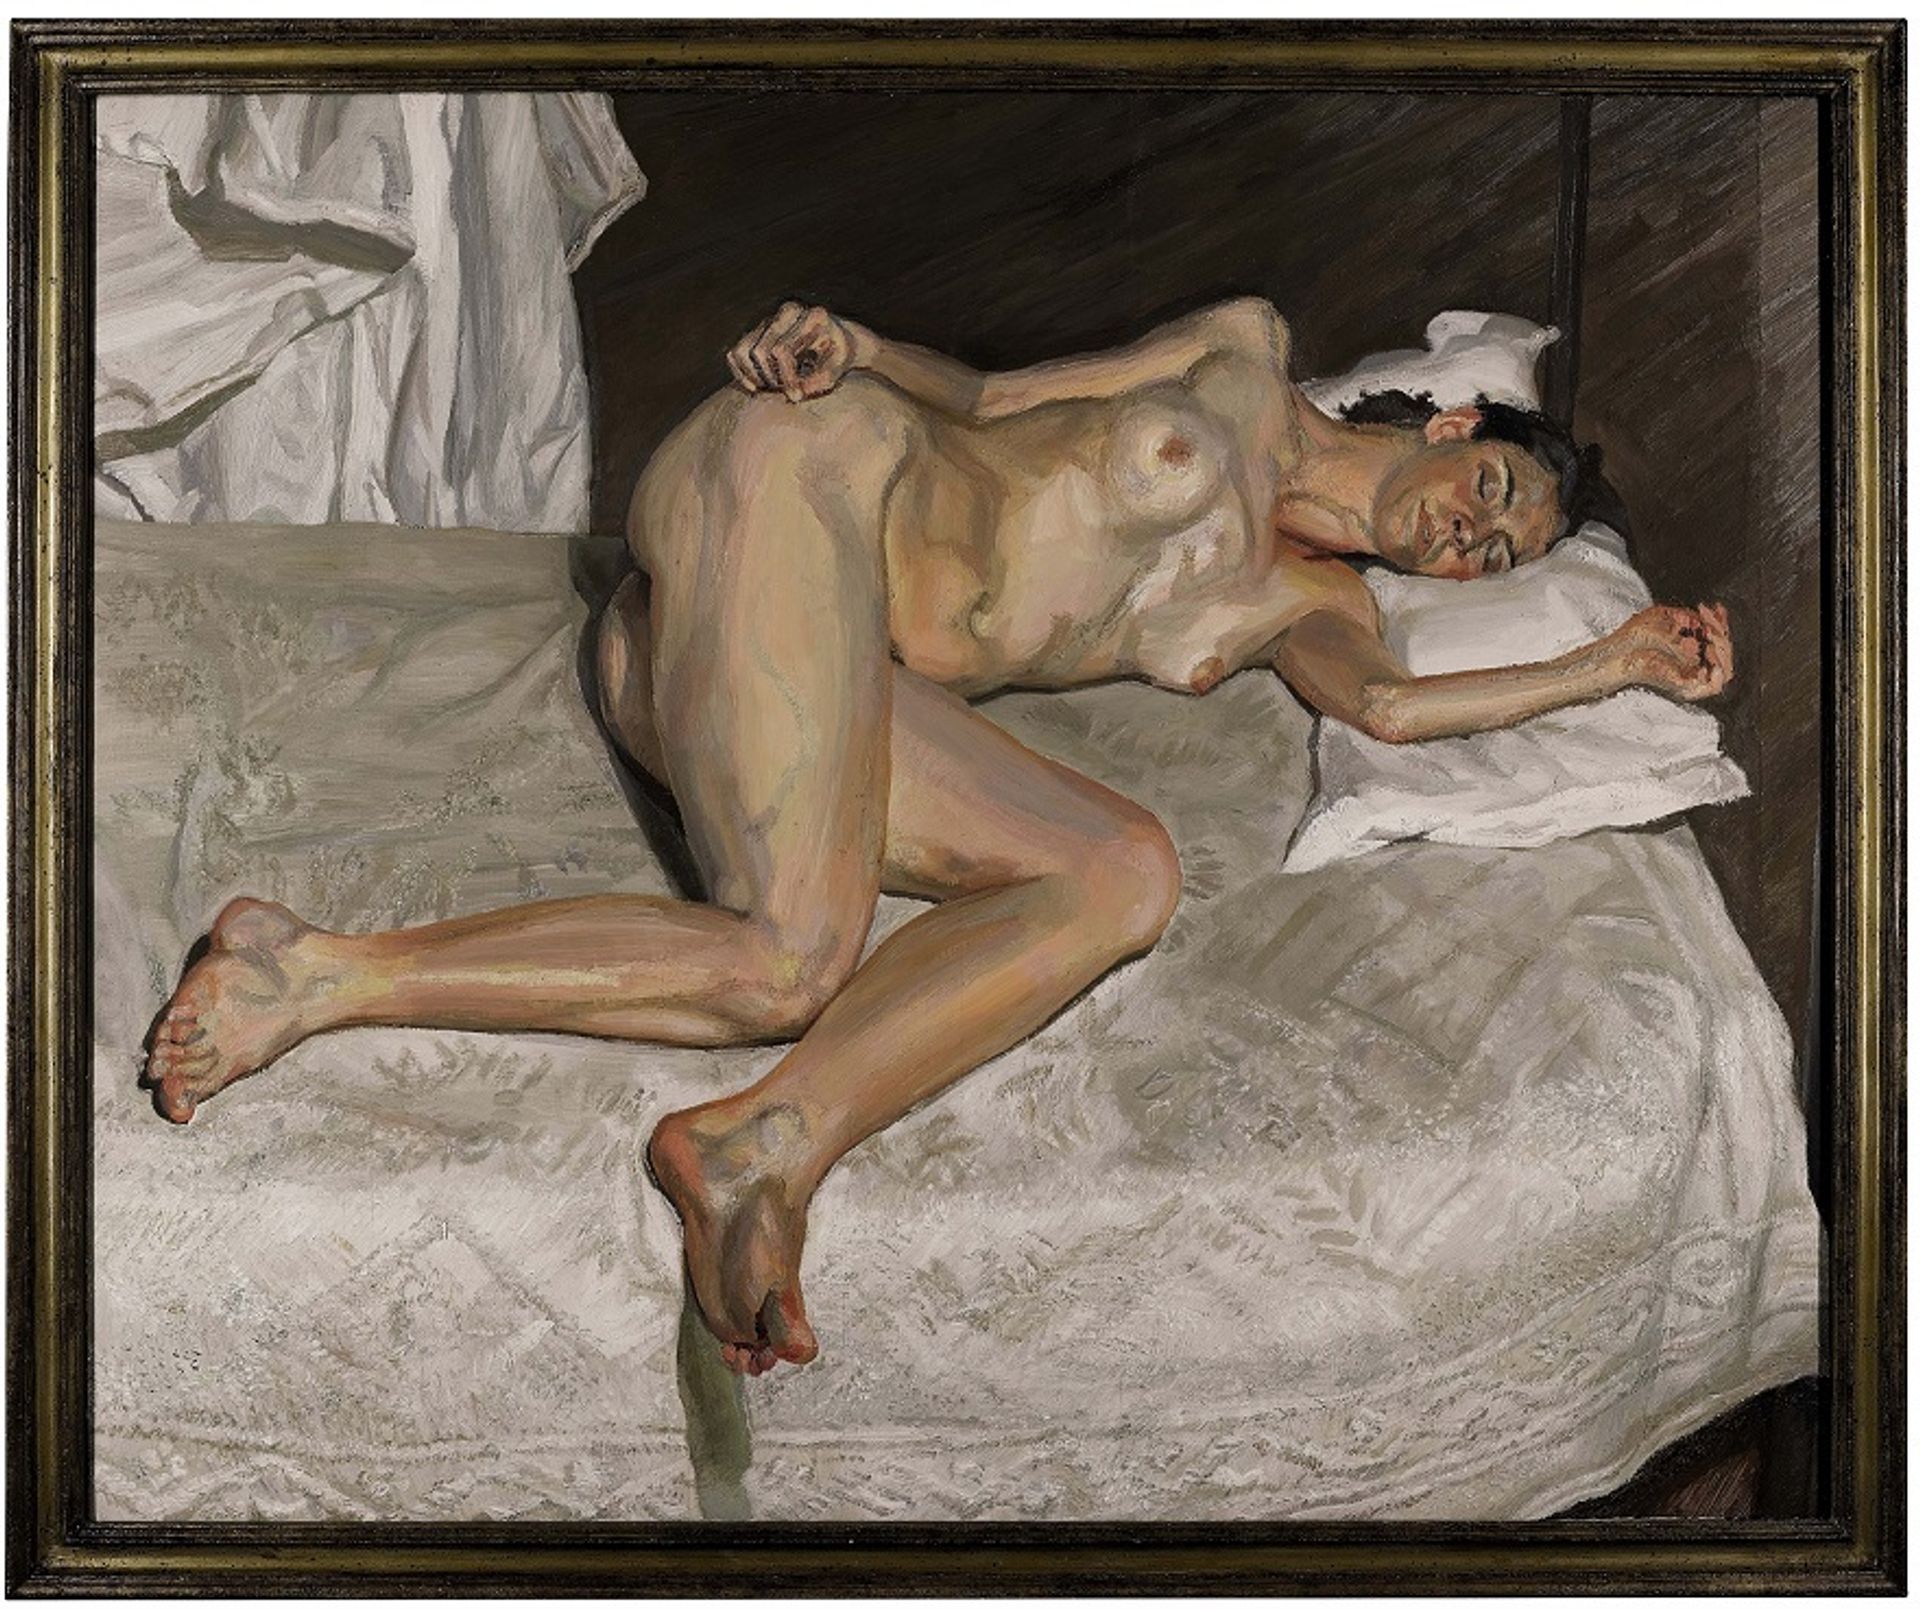 Lucian Freud’s Portrait on a White Cover (2002-03) is the most expensive work by the artist to have been sold in his hometown of London Sotheby's